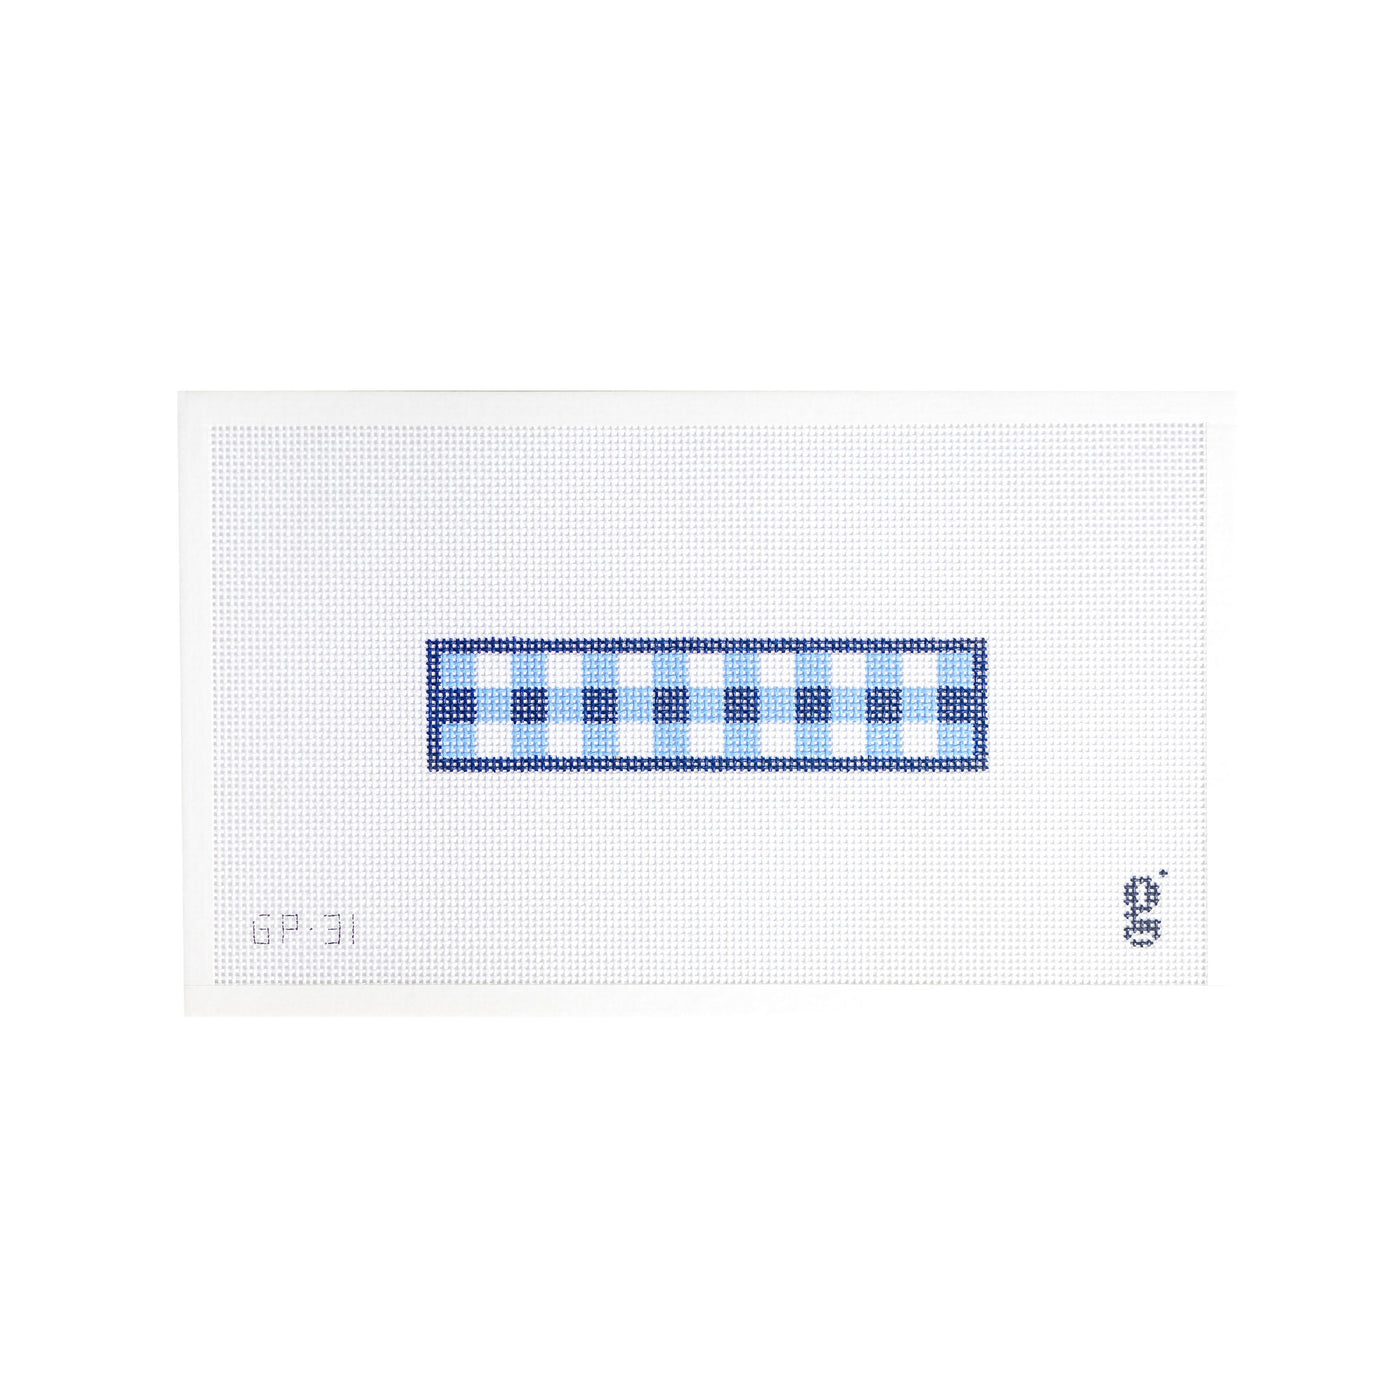 White rectangular needlepoint canvas with a smaller rectangular design of light blue, navy and white gingham with a navy border. The goodpoint logo is at bottom right corner and the SKU is at bottom left corner.